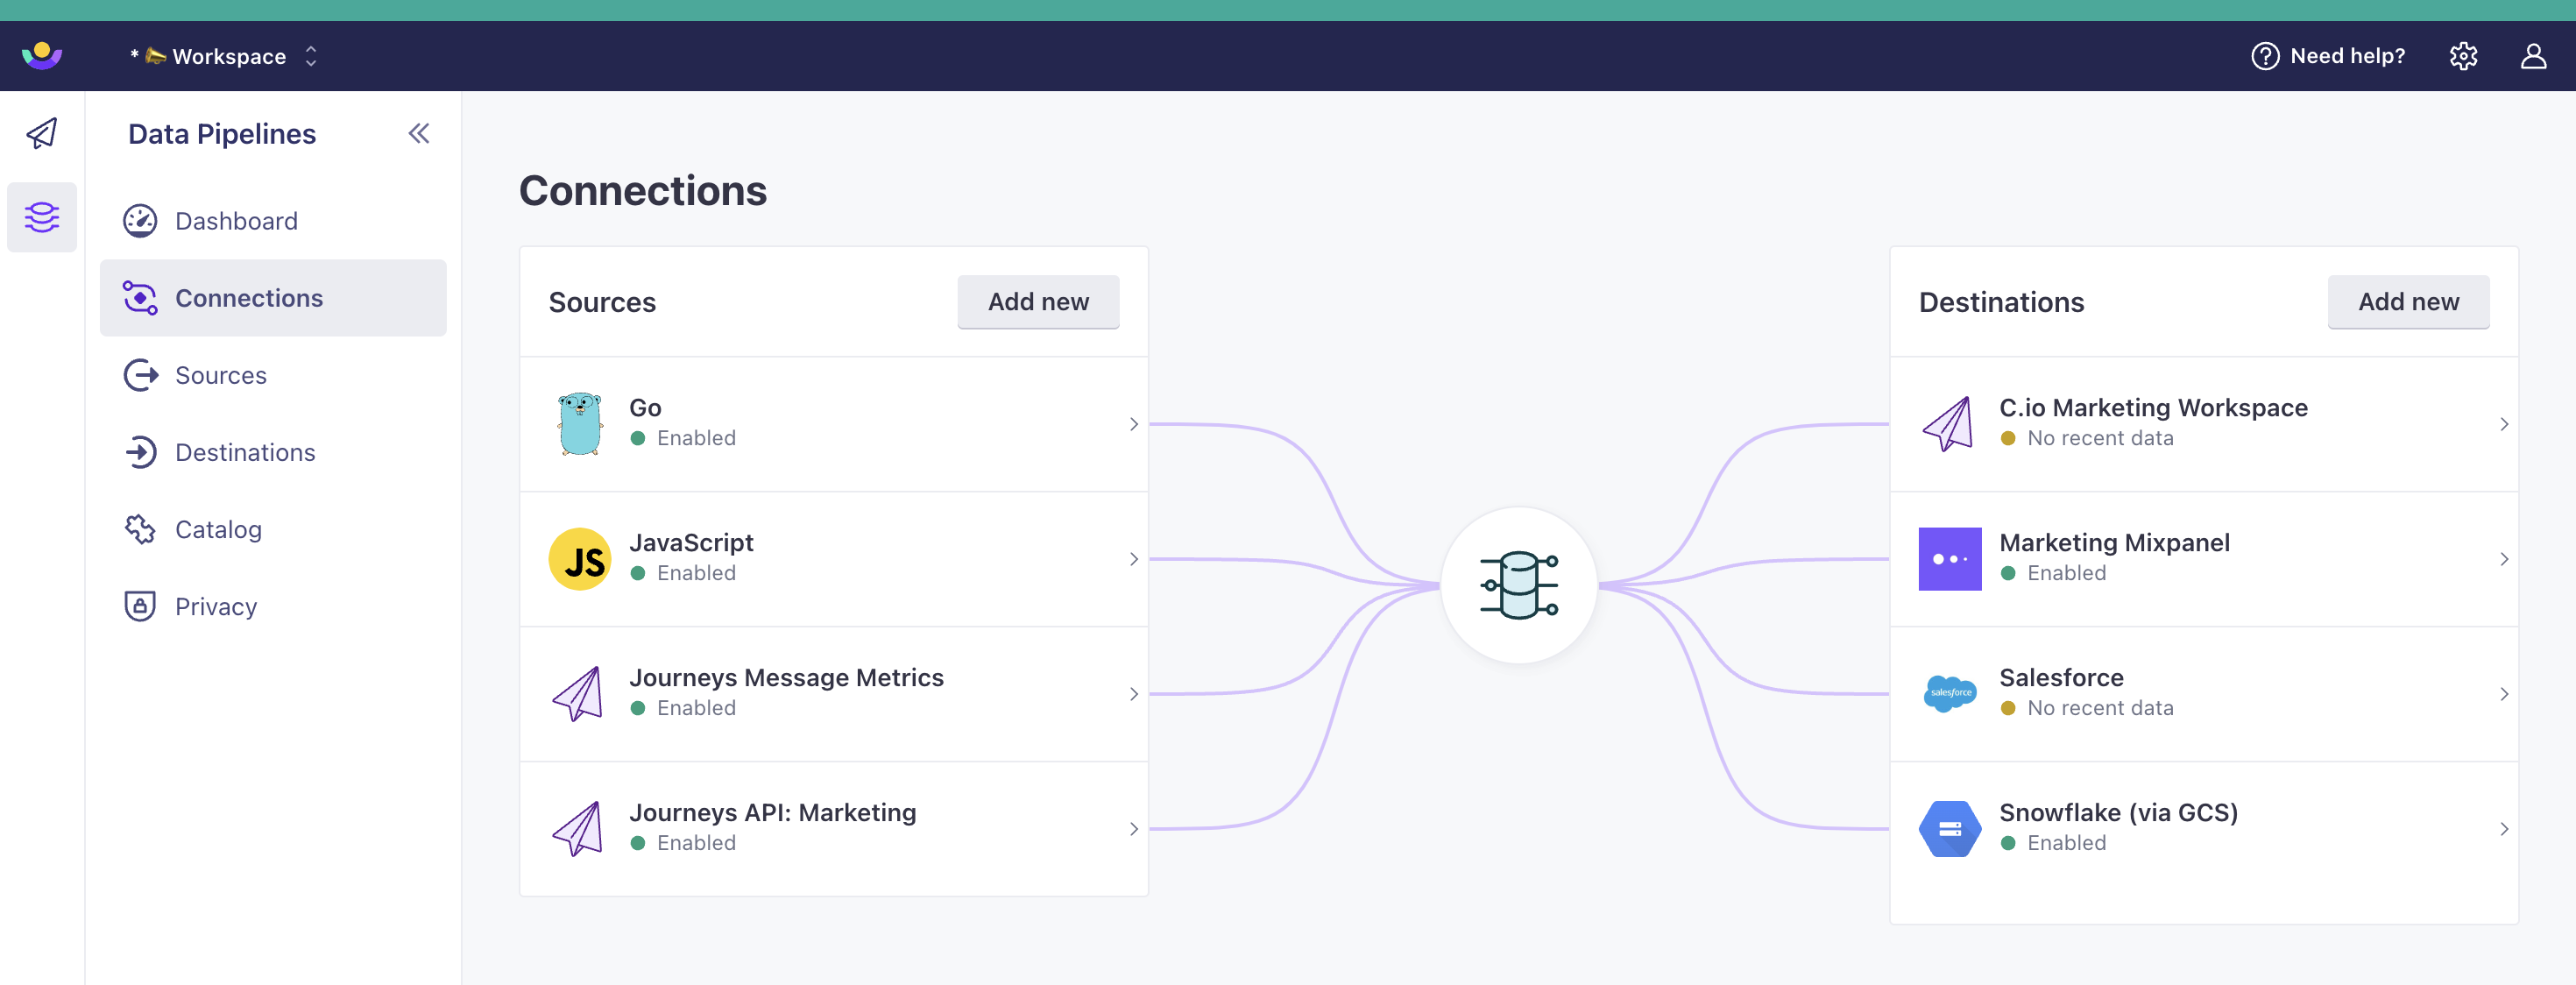 This shows the connections within Data Pipelines. There are sources on the left like Go and destinations on the right like Mixpanel.